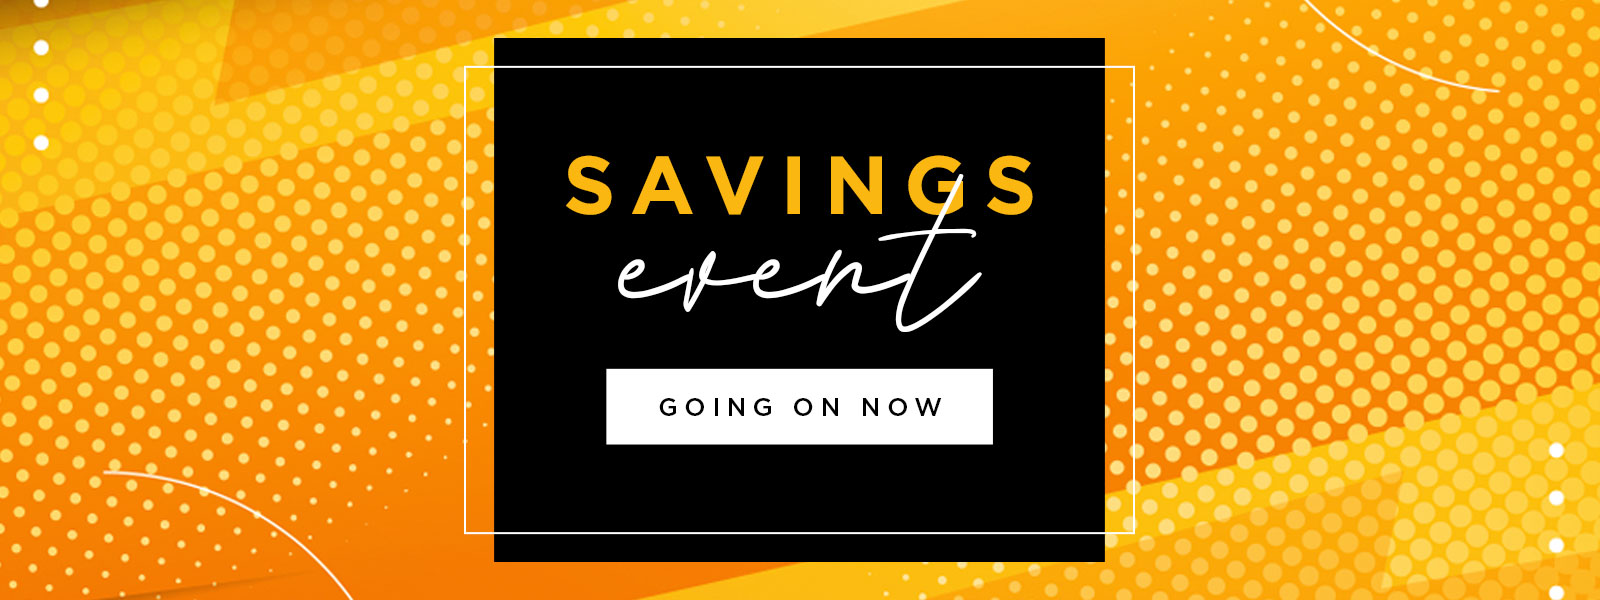 Savings Event Going On Now